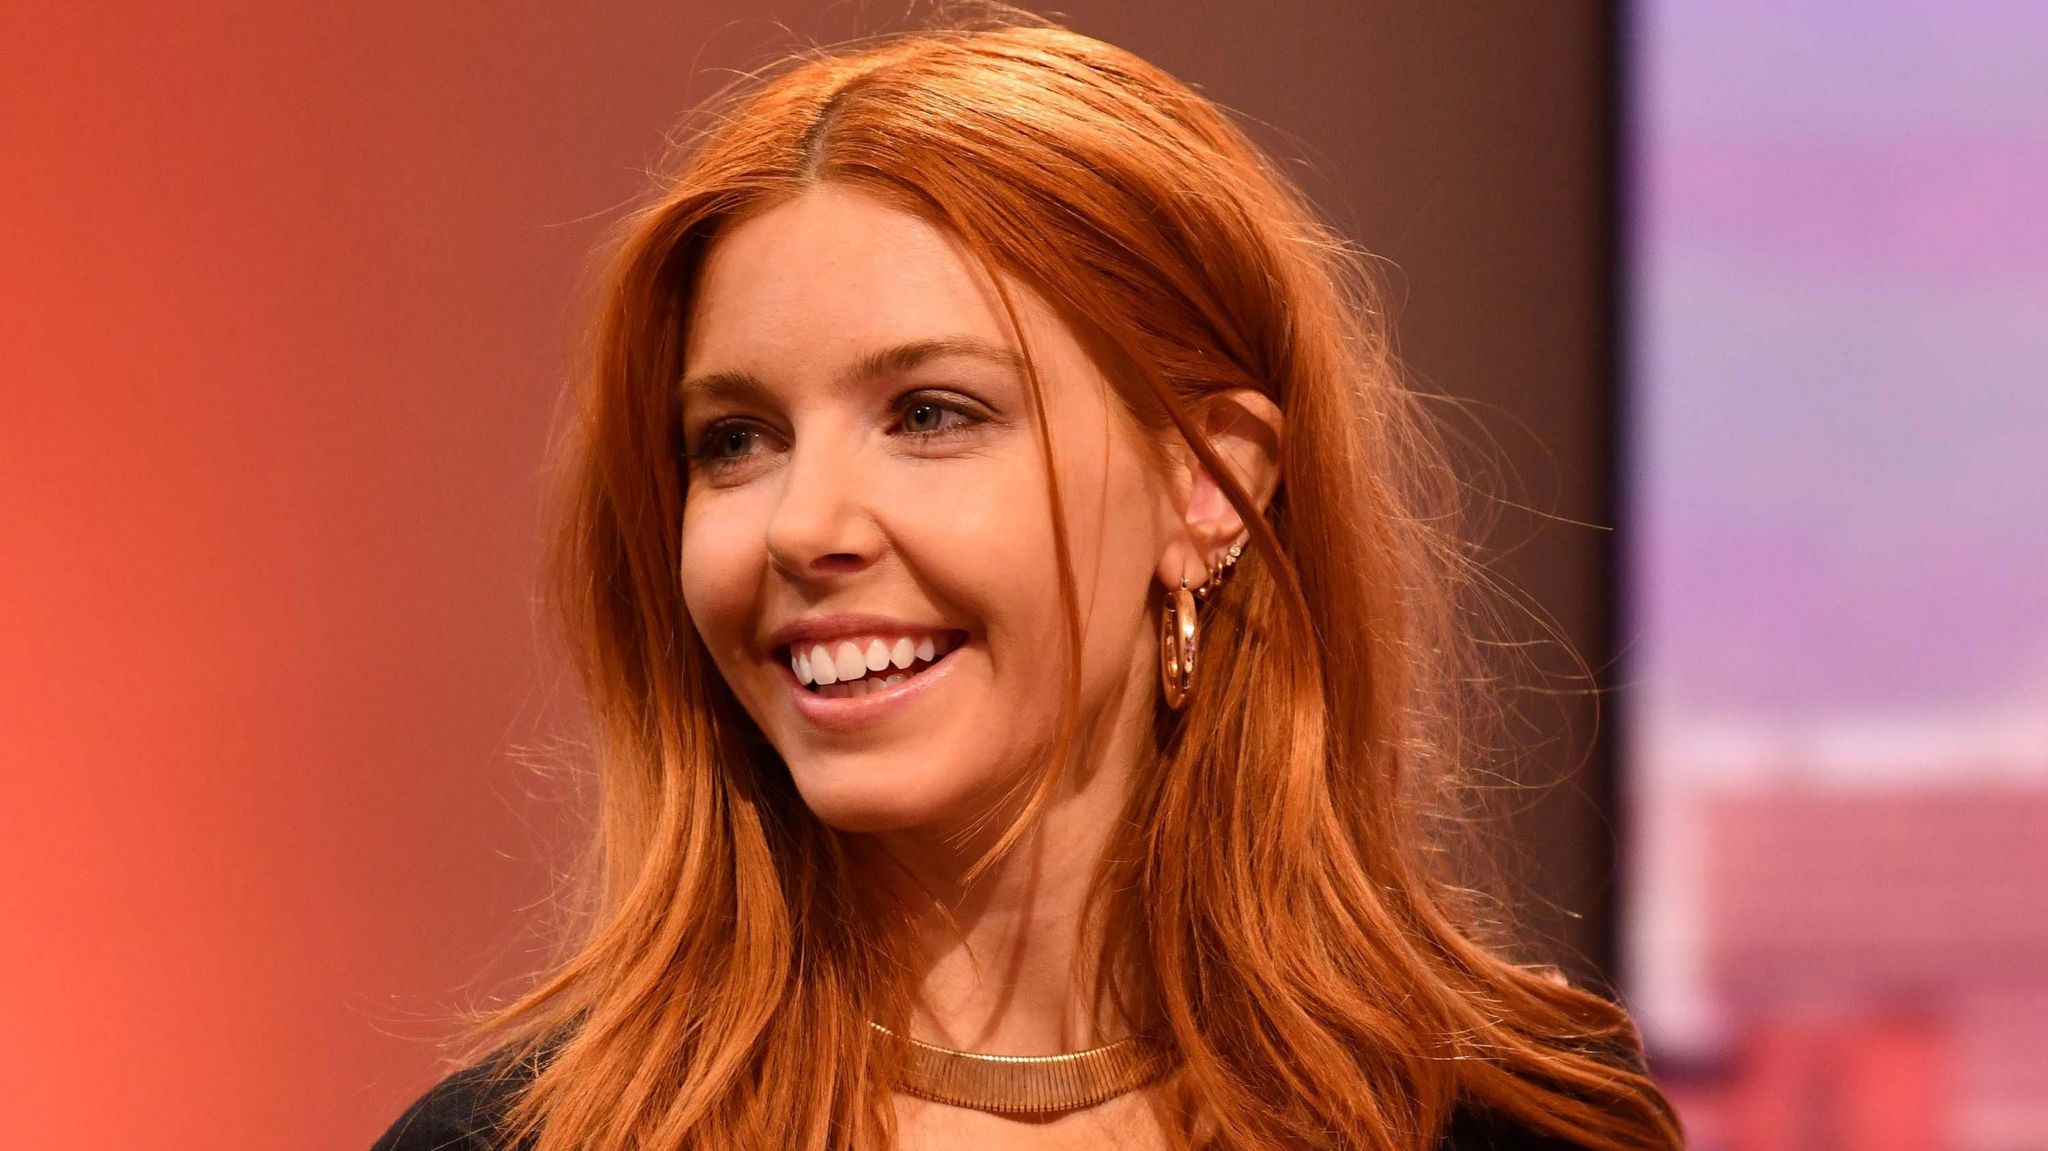 Stacey Dooley smiling